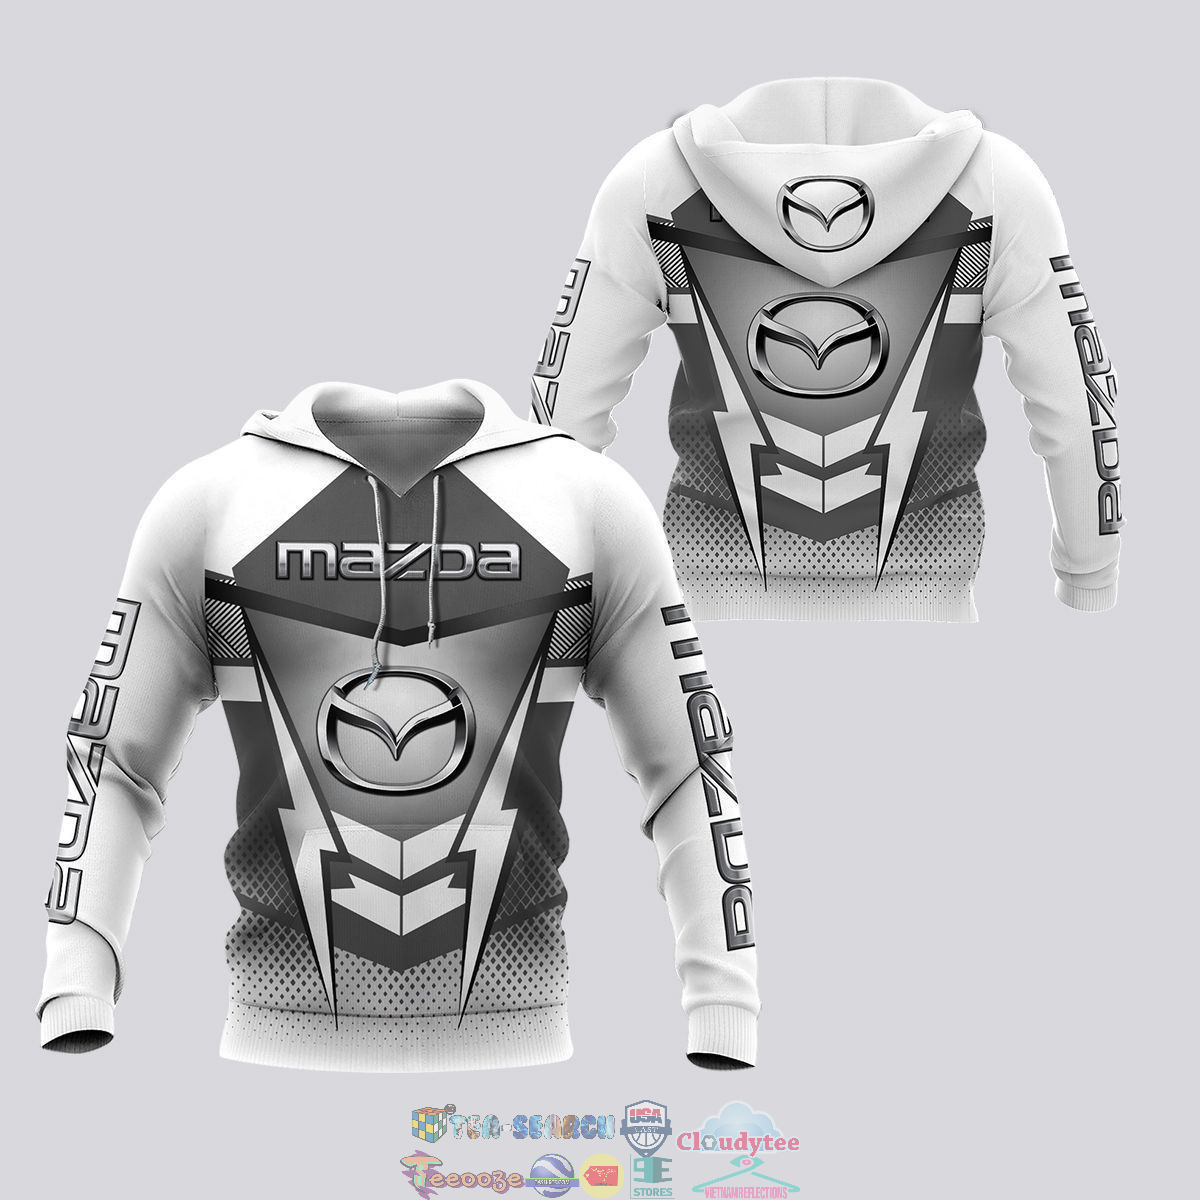 Mazda ver 11 3D hoodie and t-shirt